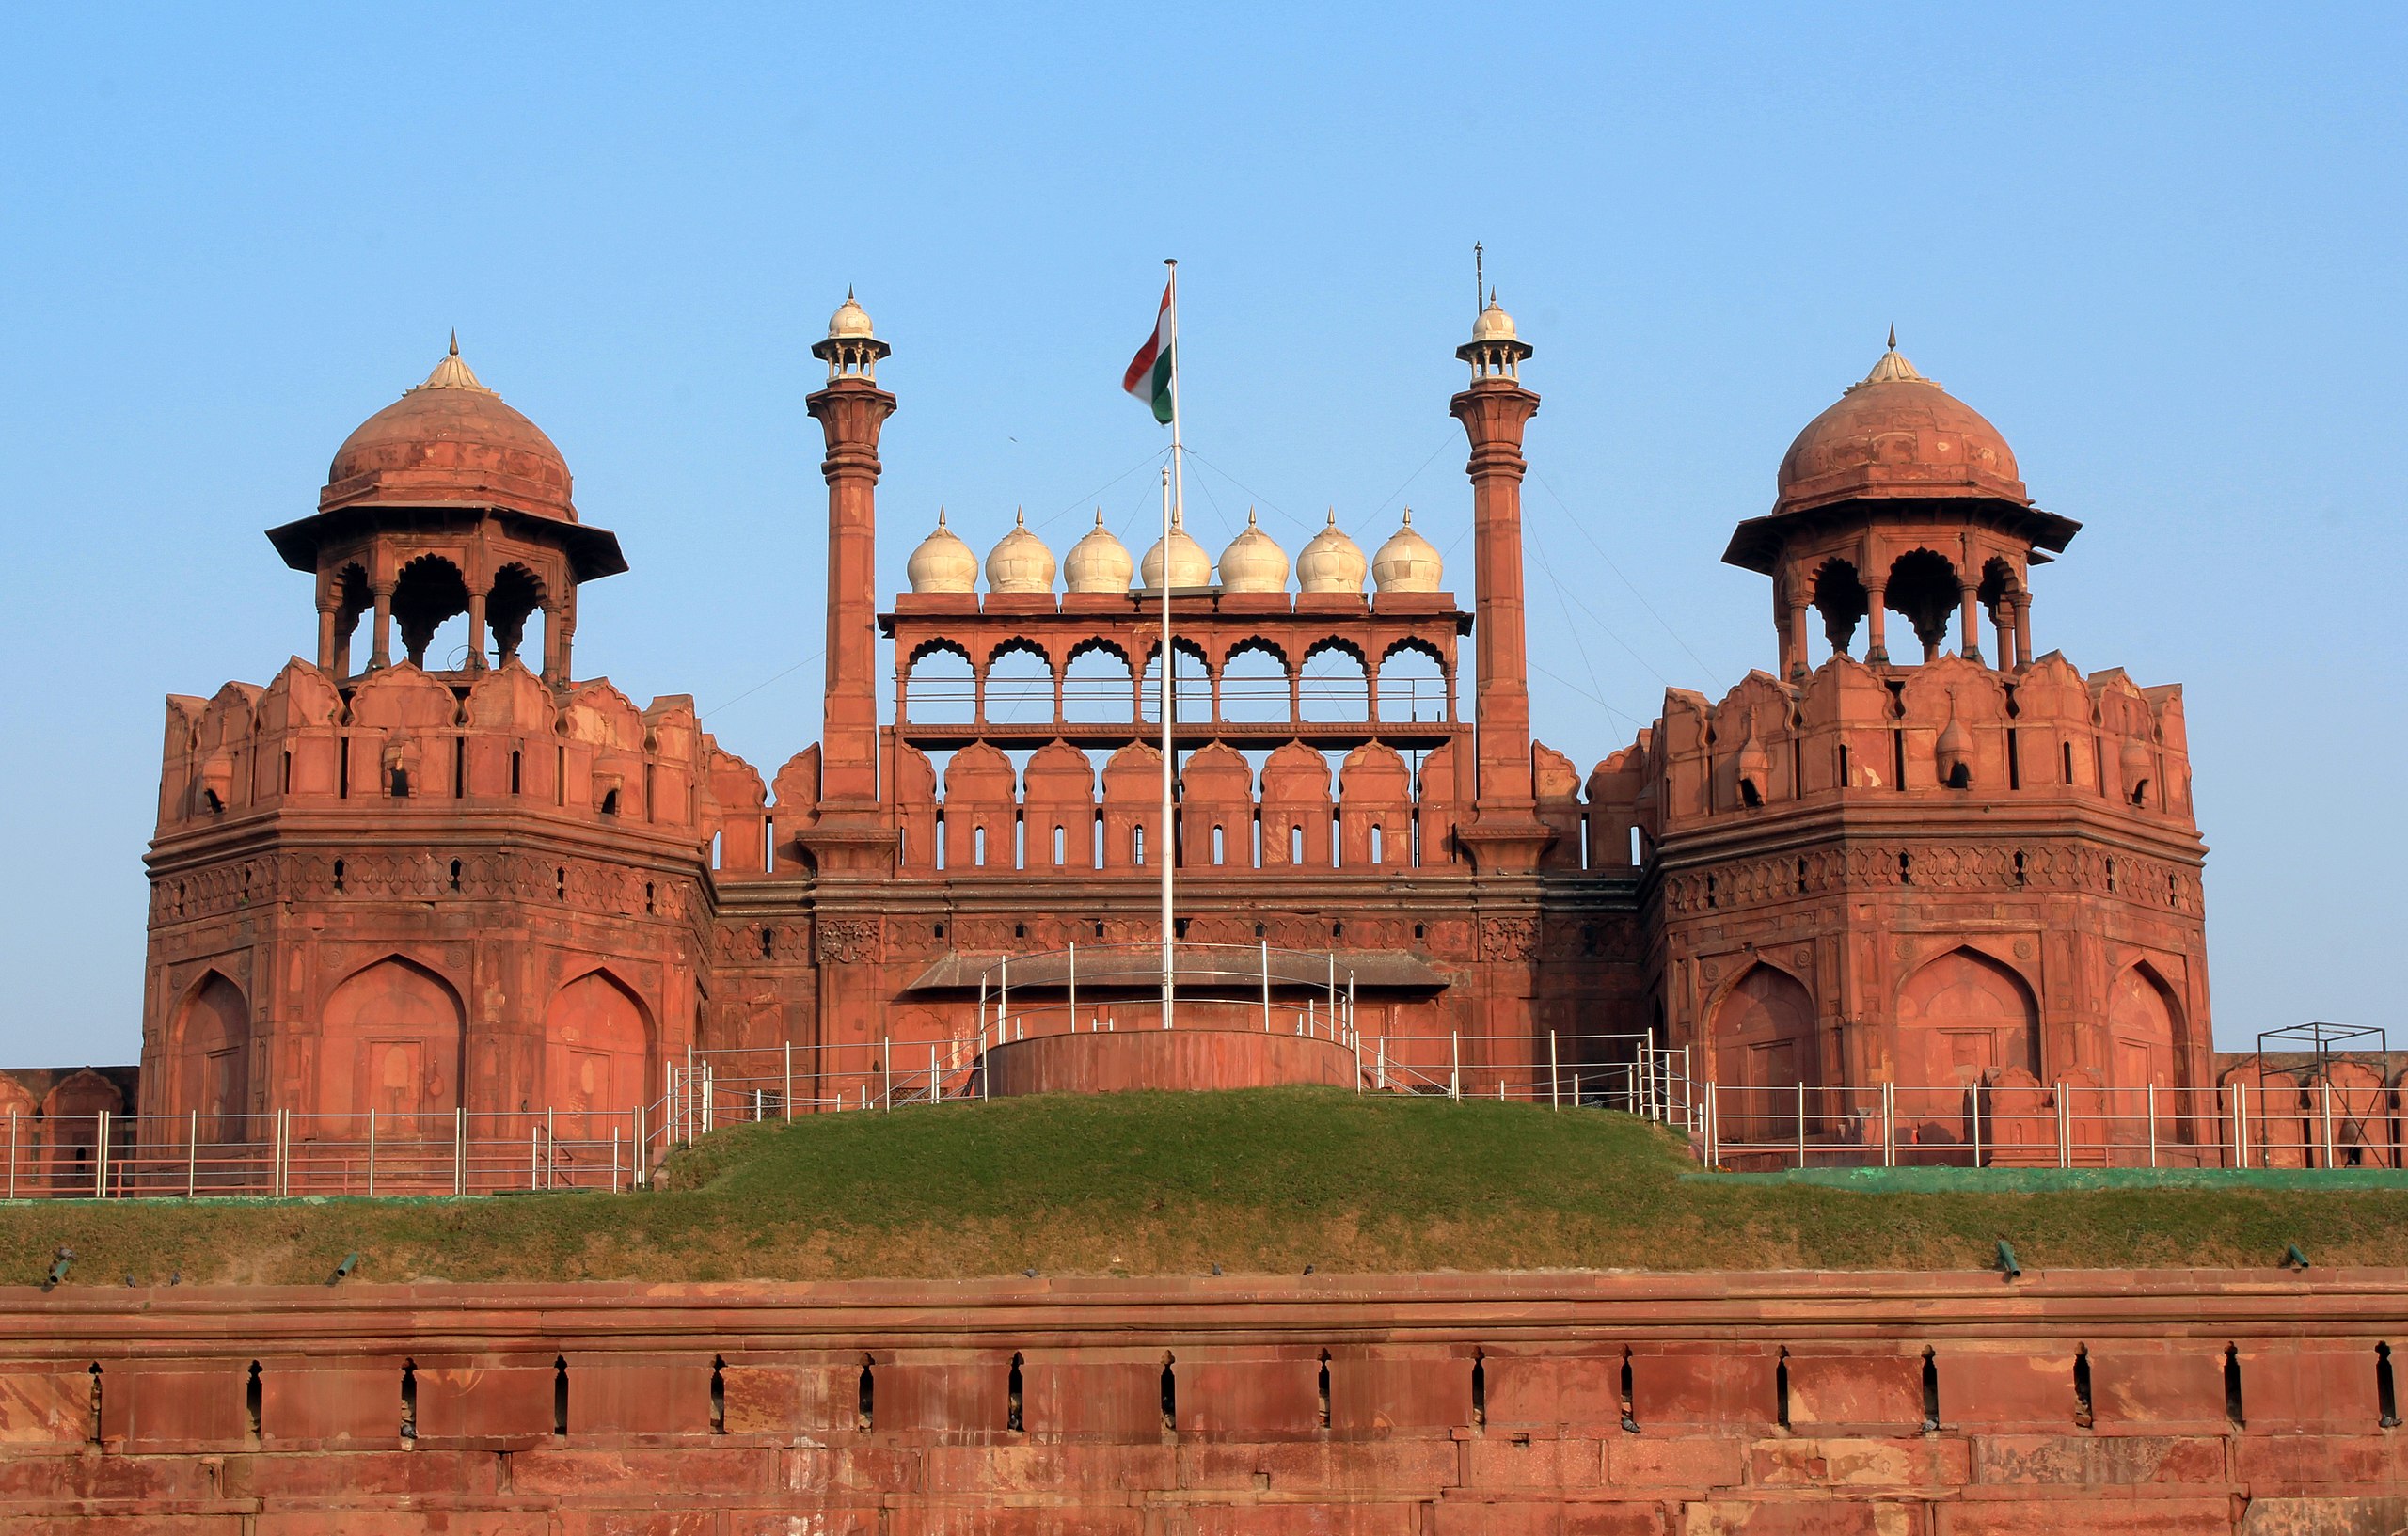 <p>When Mughal Emperor Shah Jahan moved his capital to Delhi, he started construction on Red Fort. </p>  <p>Built from red sandstone, the fort features a combination of traditional Mughal architecture with<strong> Hindu, Persian, and Timurid designs</strong>.</p>